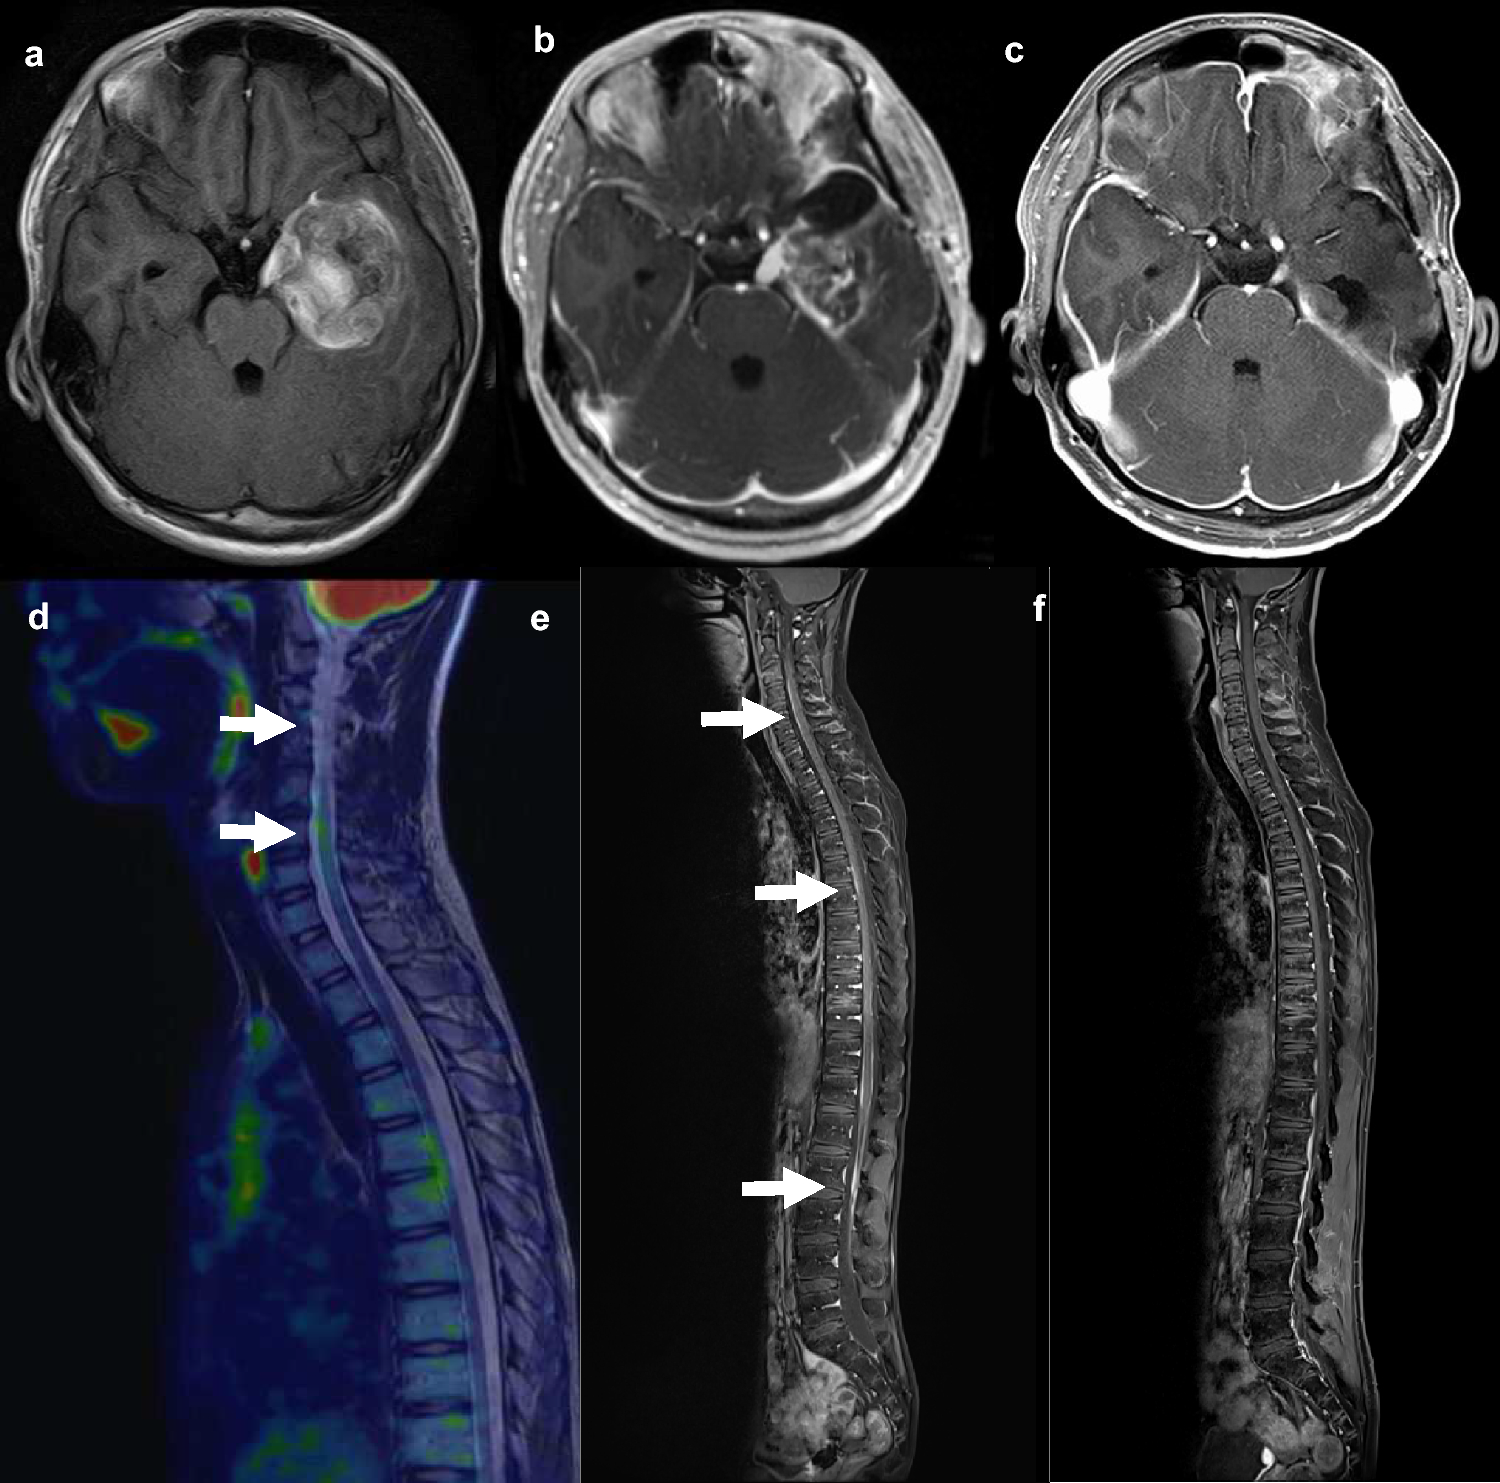 Successful treatment of pediatric patients with high-grade gliomas featuring leptomeningeal metastases by targeting BRAF V600E mutations with dabrafenib plus trametinib: two illustrative cases